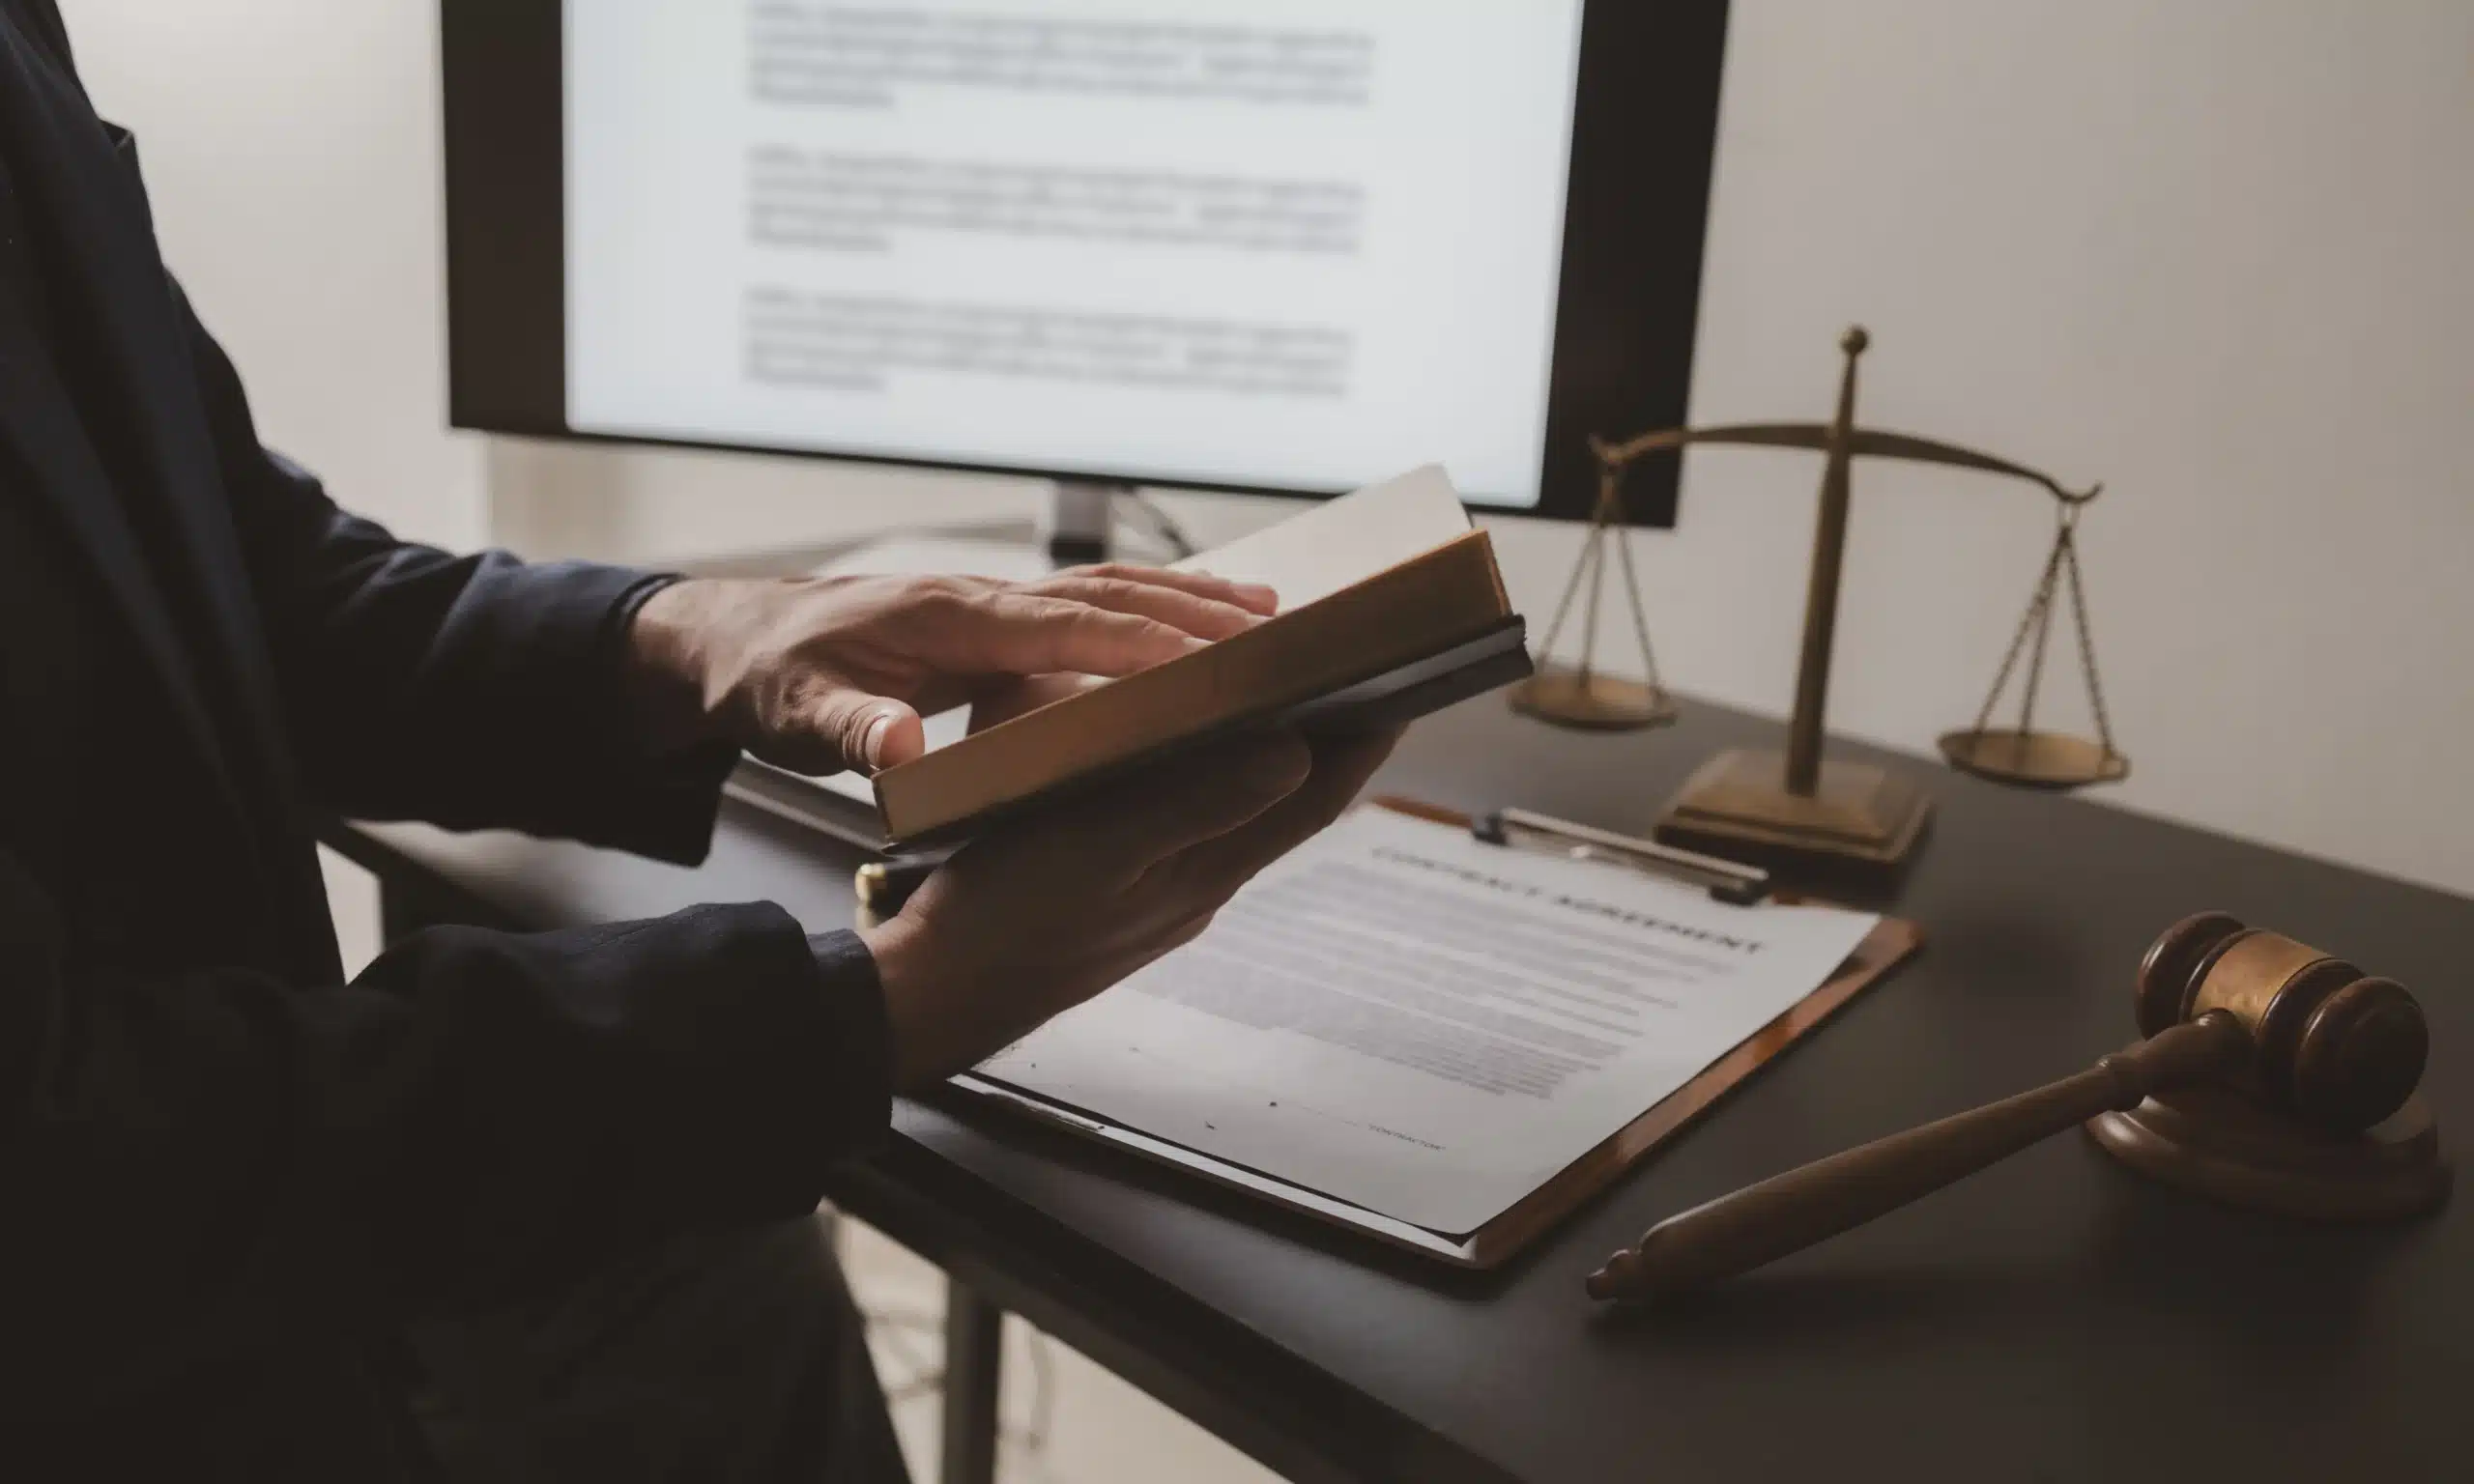 A lawyer at a desk with an open law book browsing pages to prepare for a case.